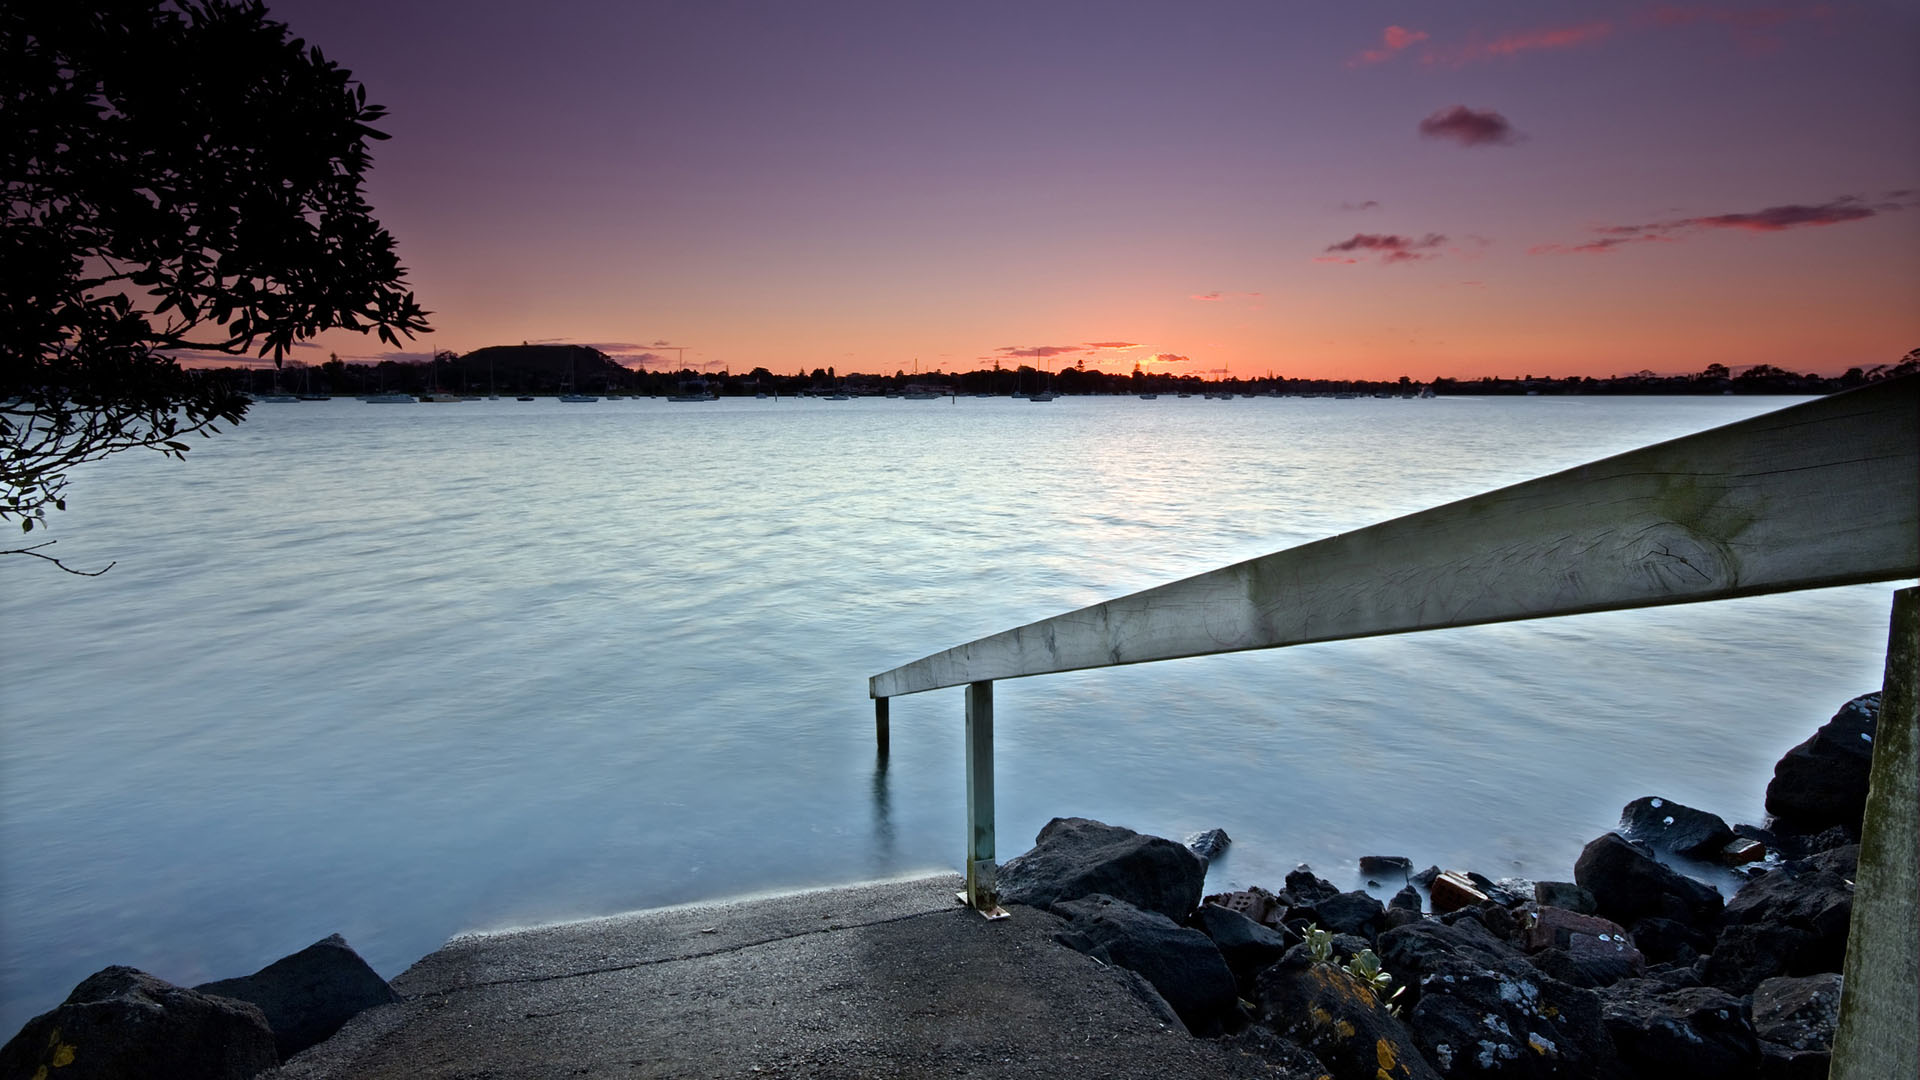 Free Download Natural Scenery Picture - The Peaceful Sea Under the Pink Sky, Clean Stairs Leading to the Bottom 1920X1080 free wallpaper download